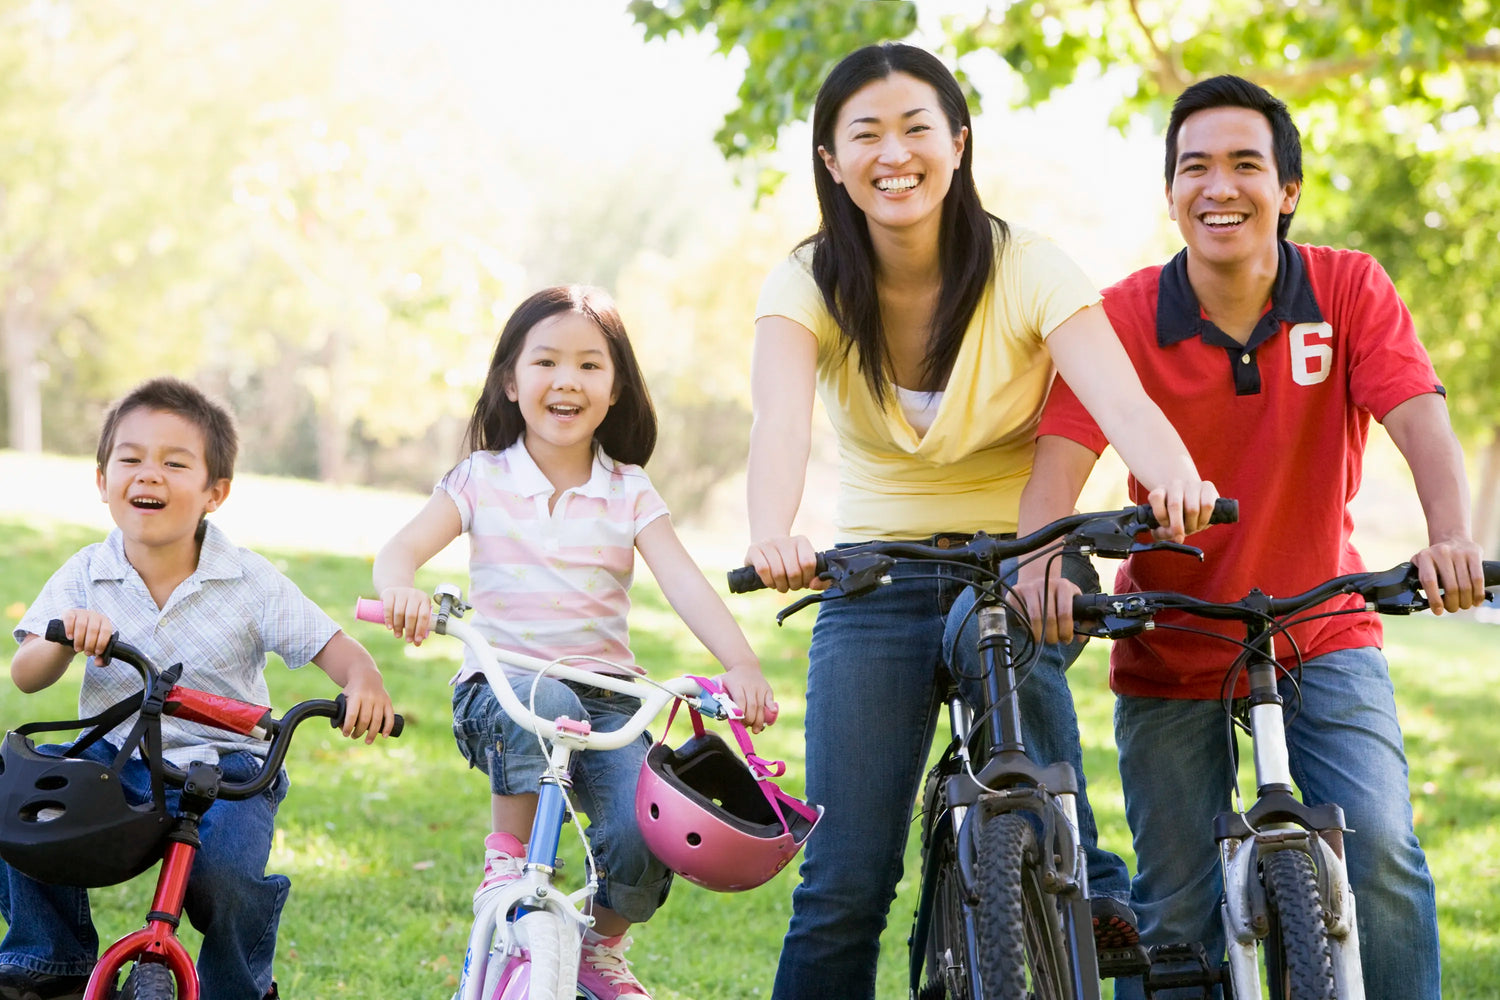 7 Ways to Stay Fit as a Family